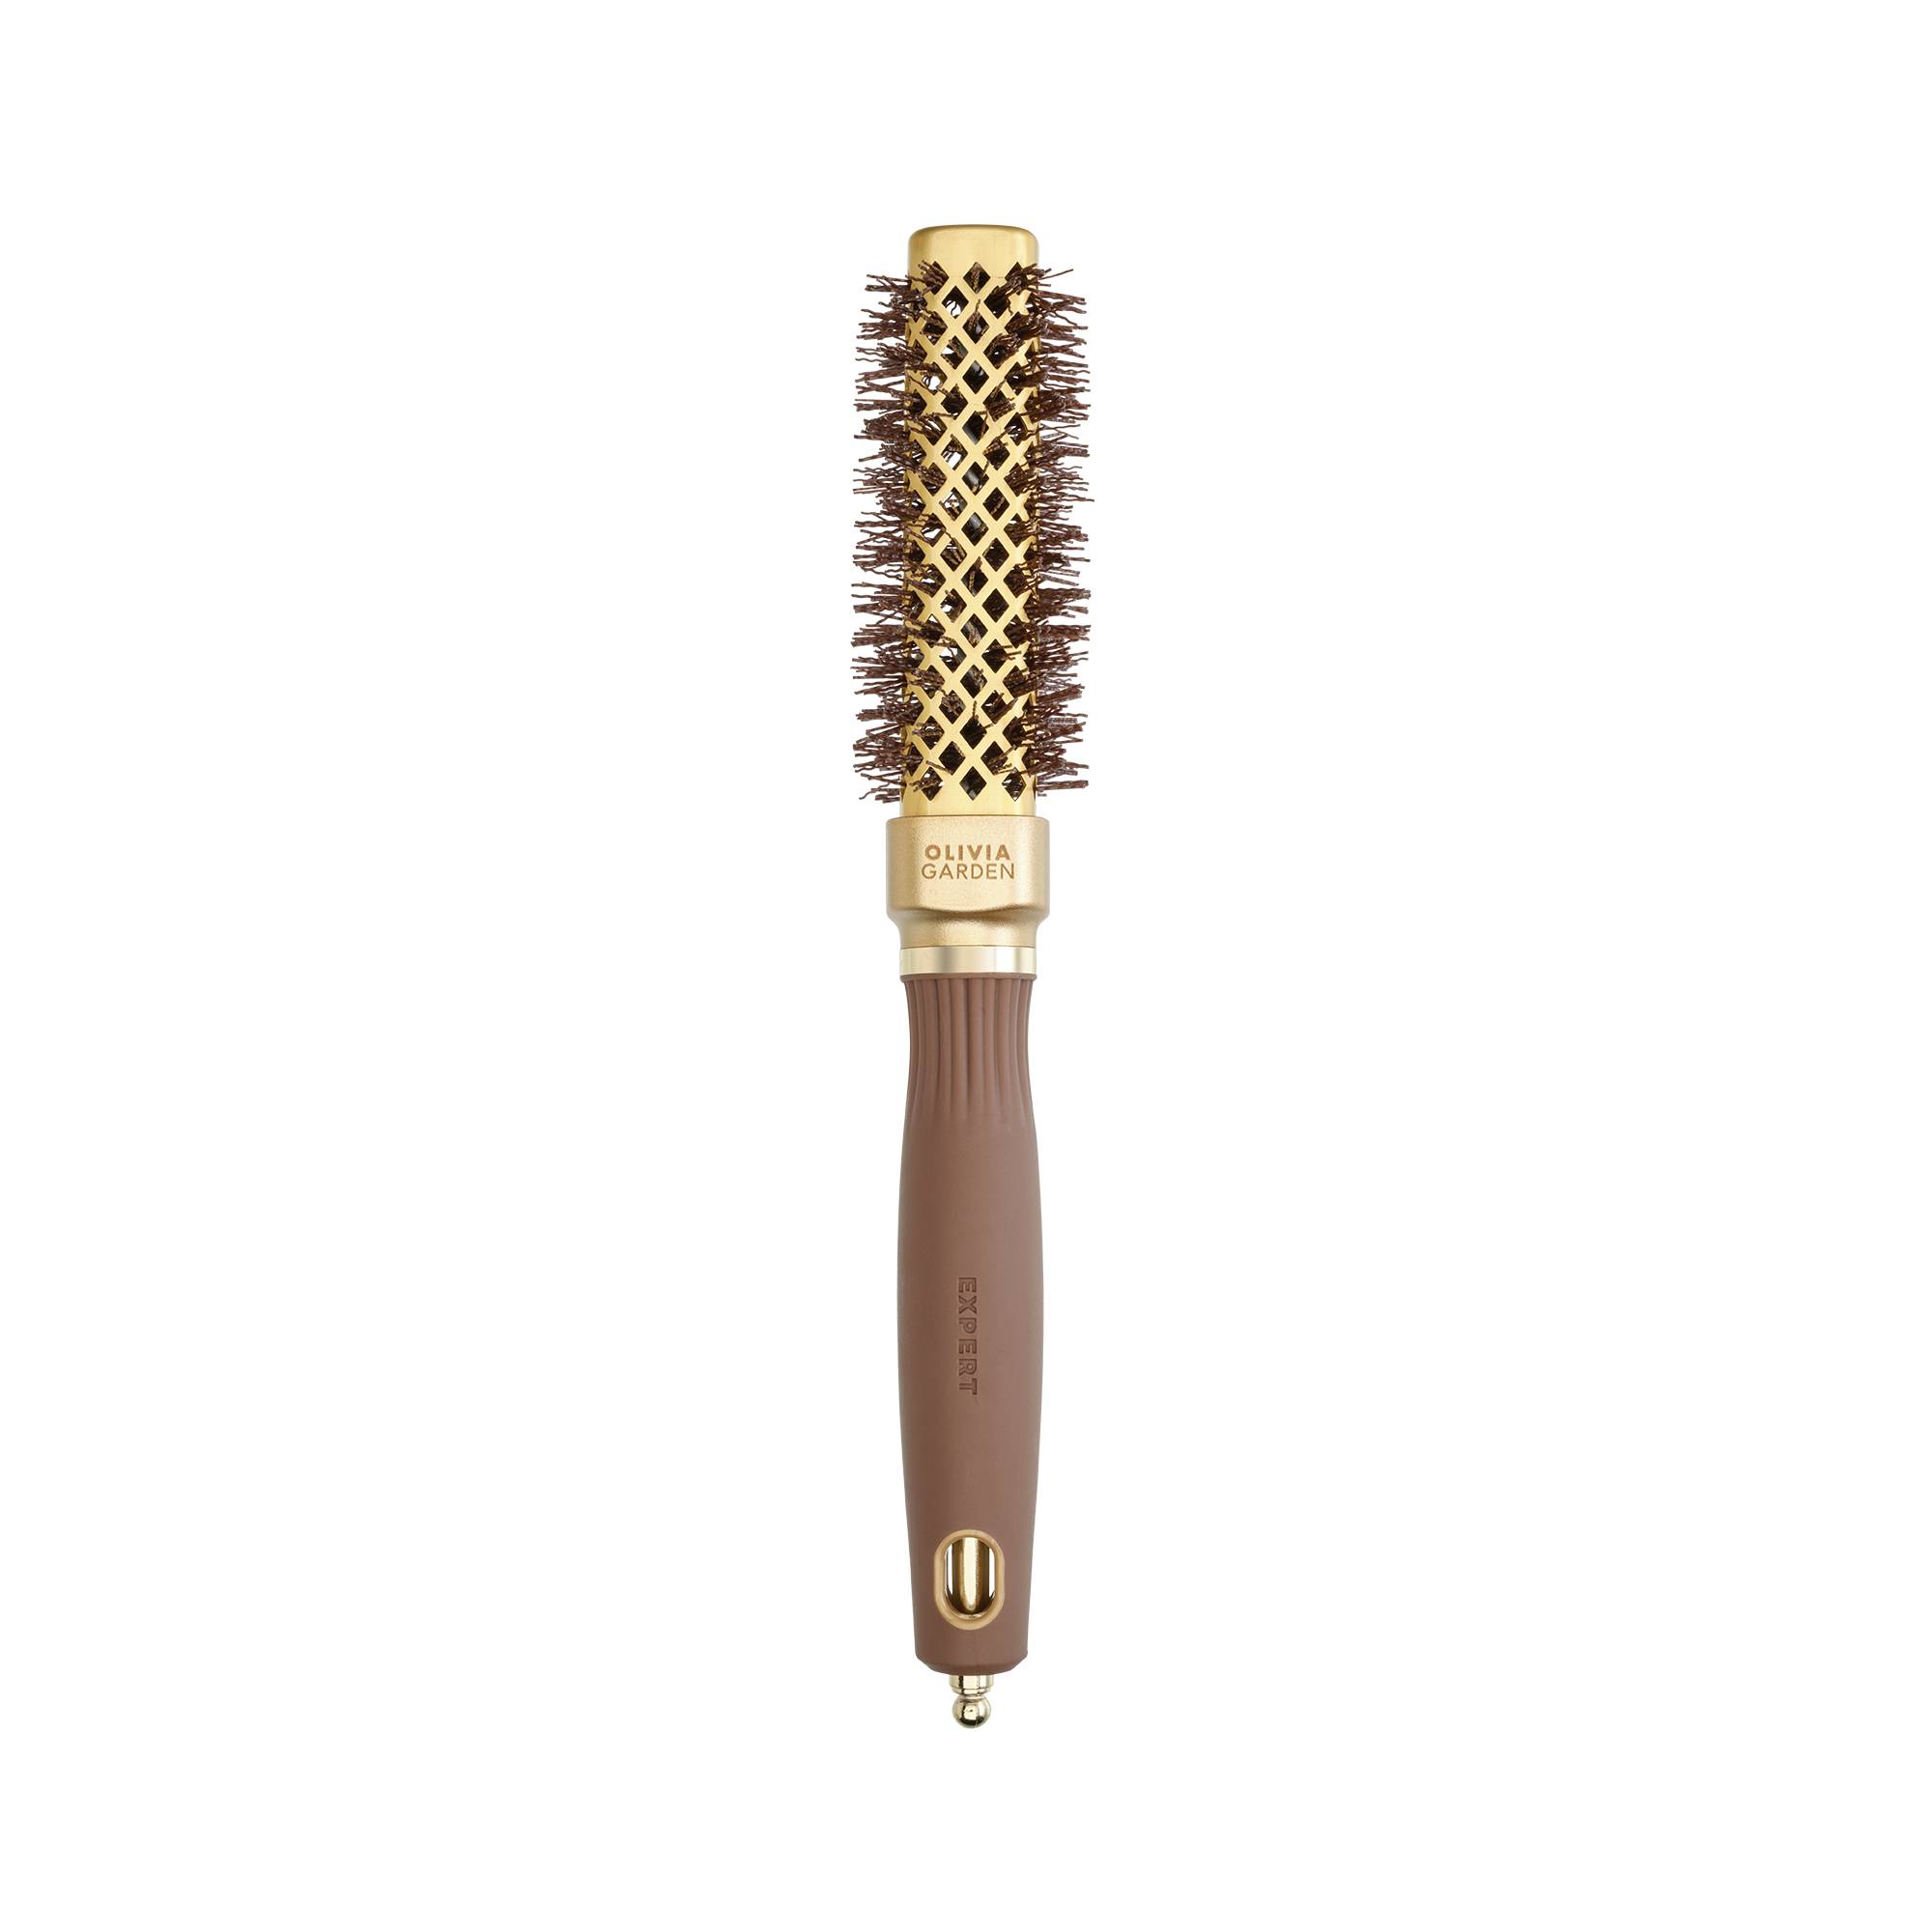 Spazzola per il brushing Expert Blowout Straight Wavy Bristle Gold&Brown 20mm del marchio Olivia Garden - 1